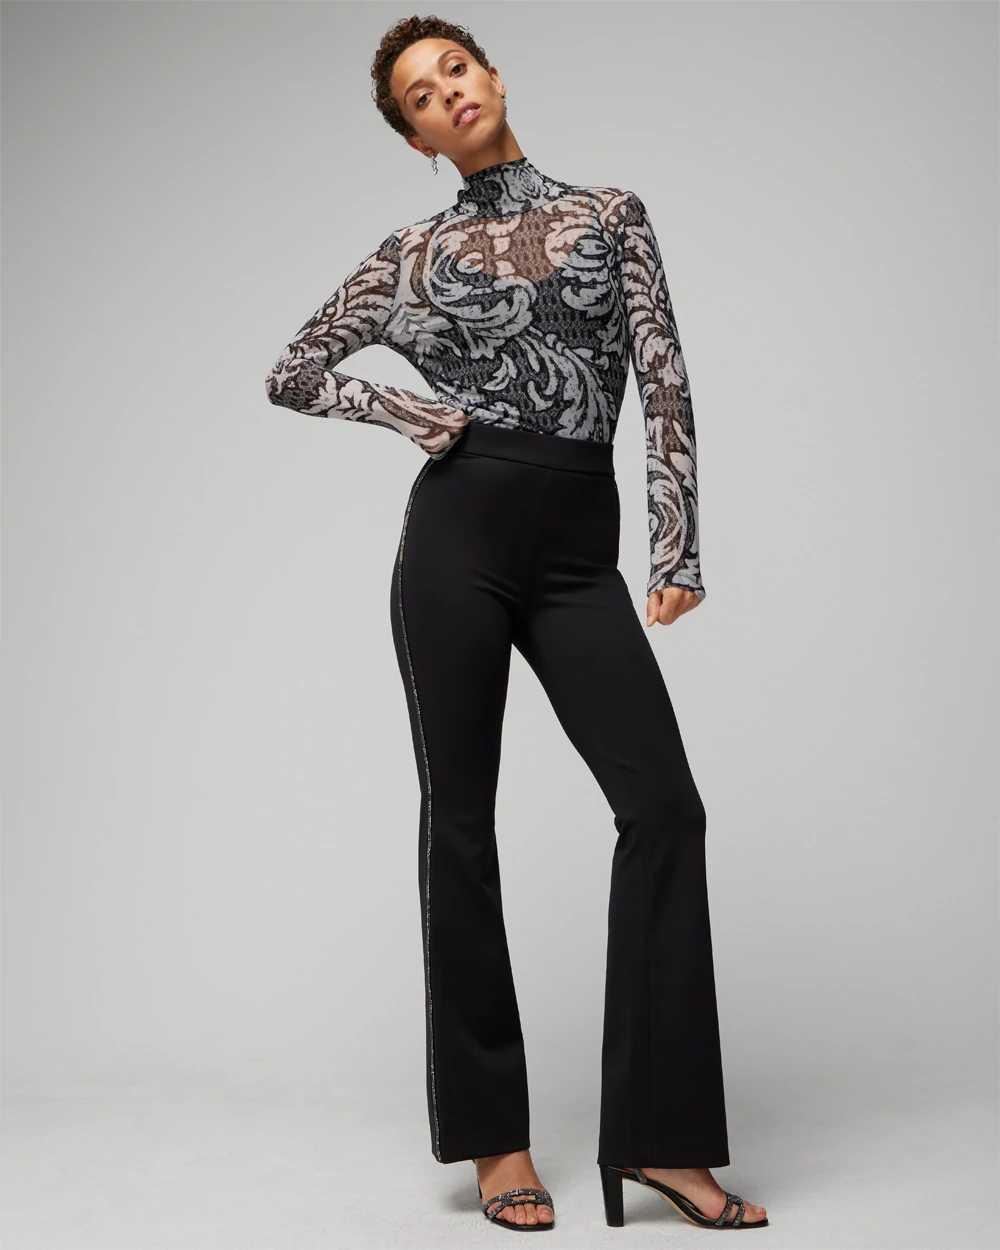 Pull On Embellished Tuxedo Trim Flare Pants click to view larger image.